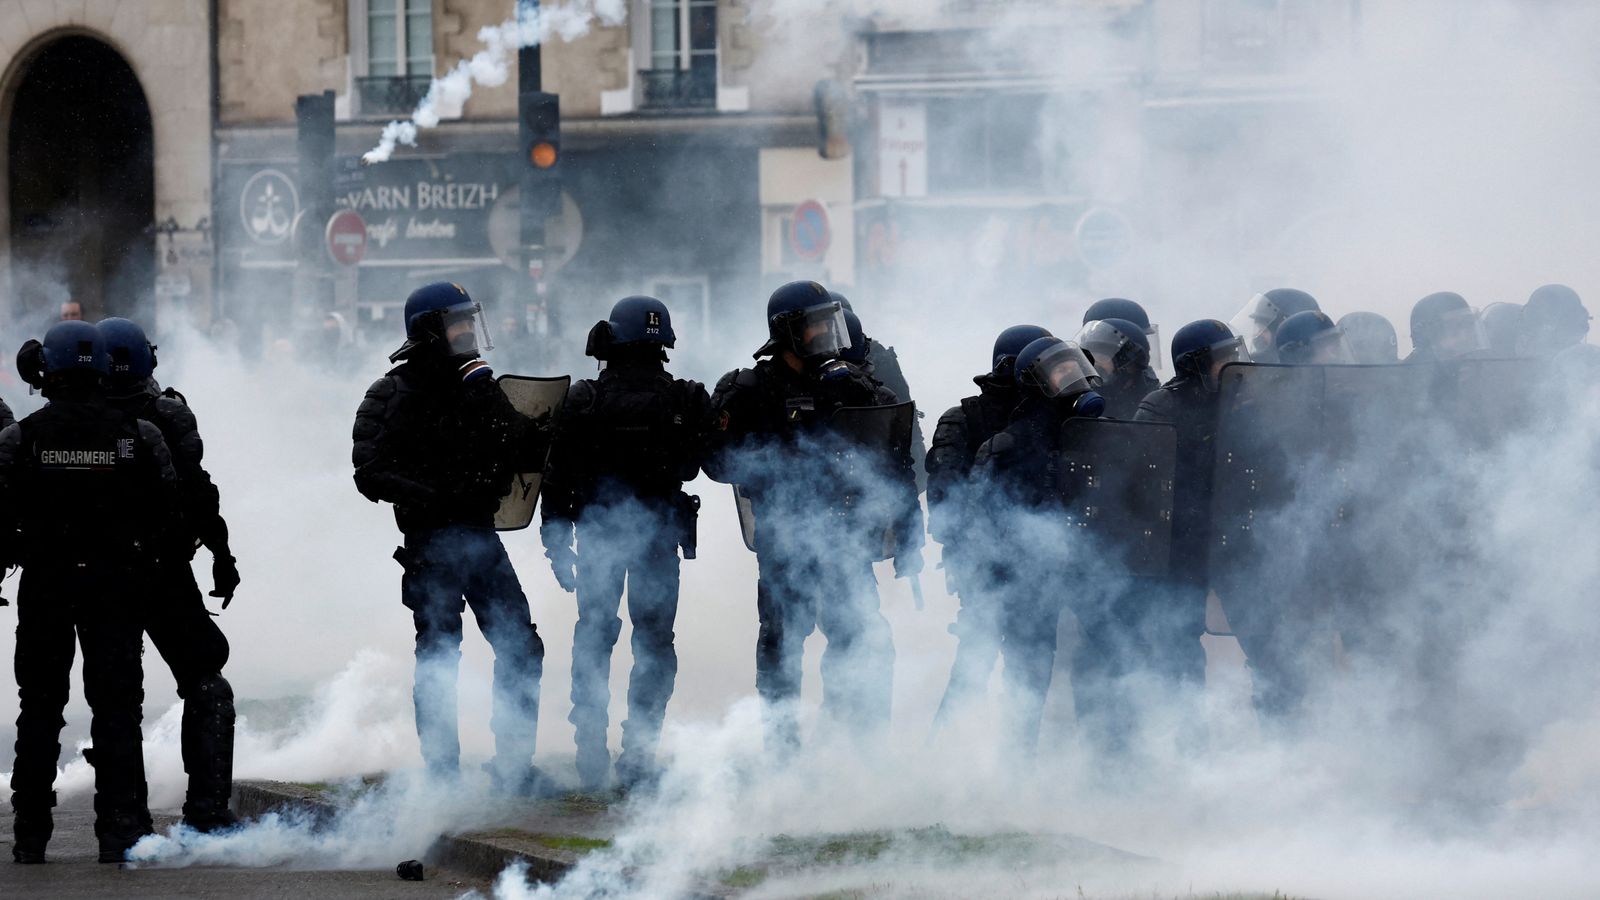 King and Queen Consort's state visit to France postponed following violent protests